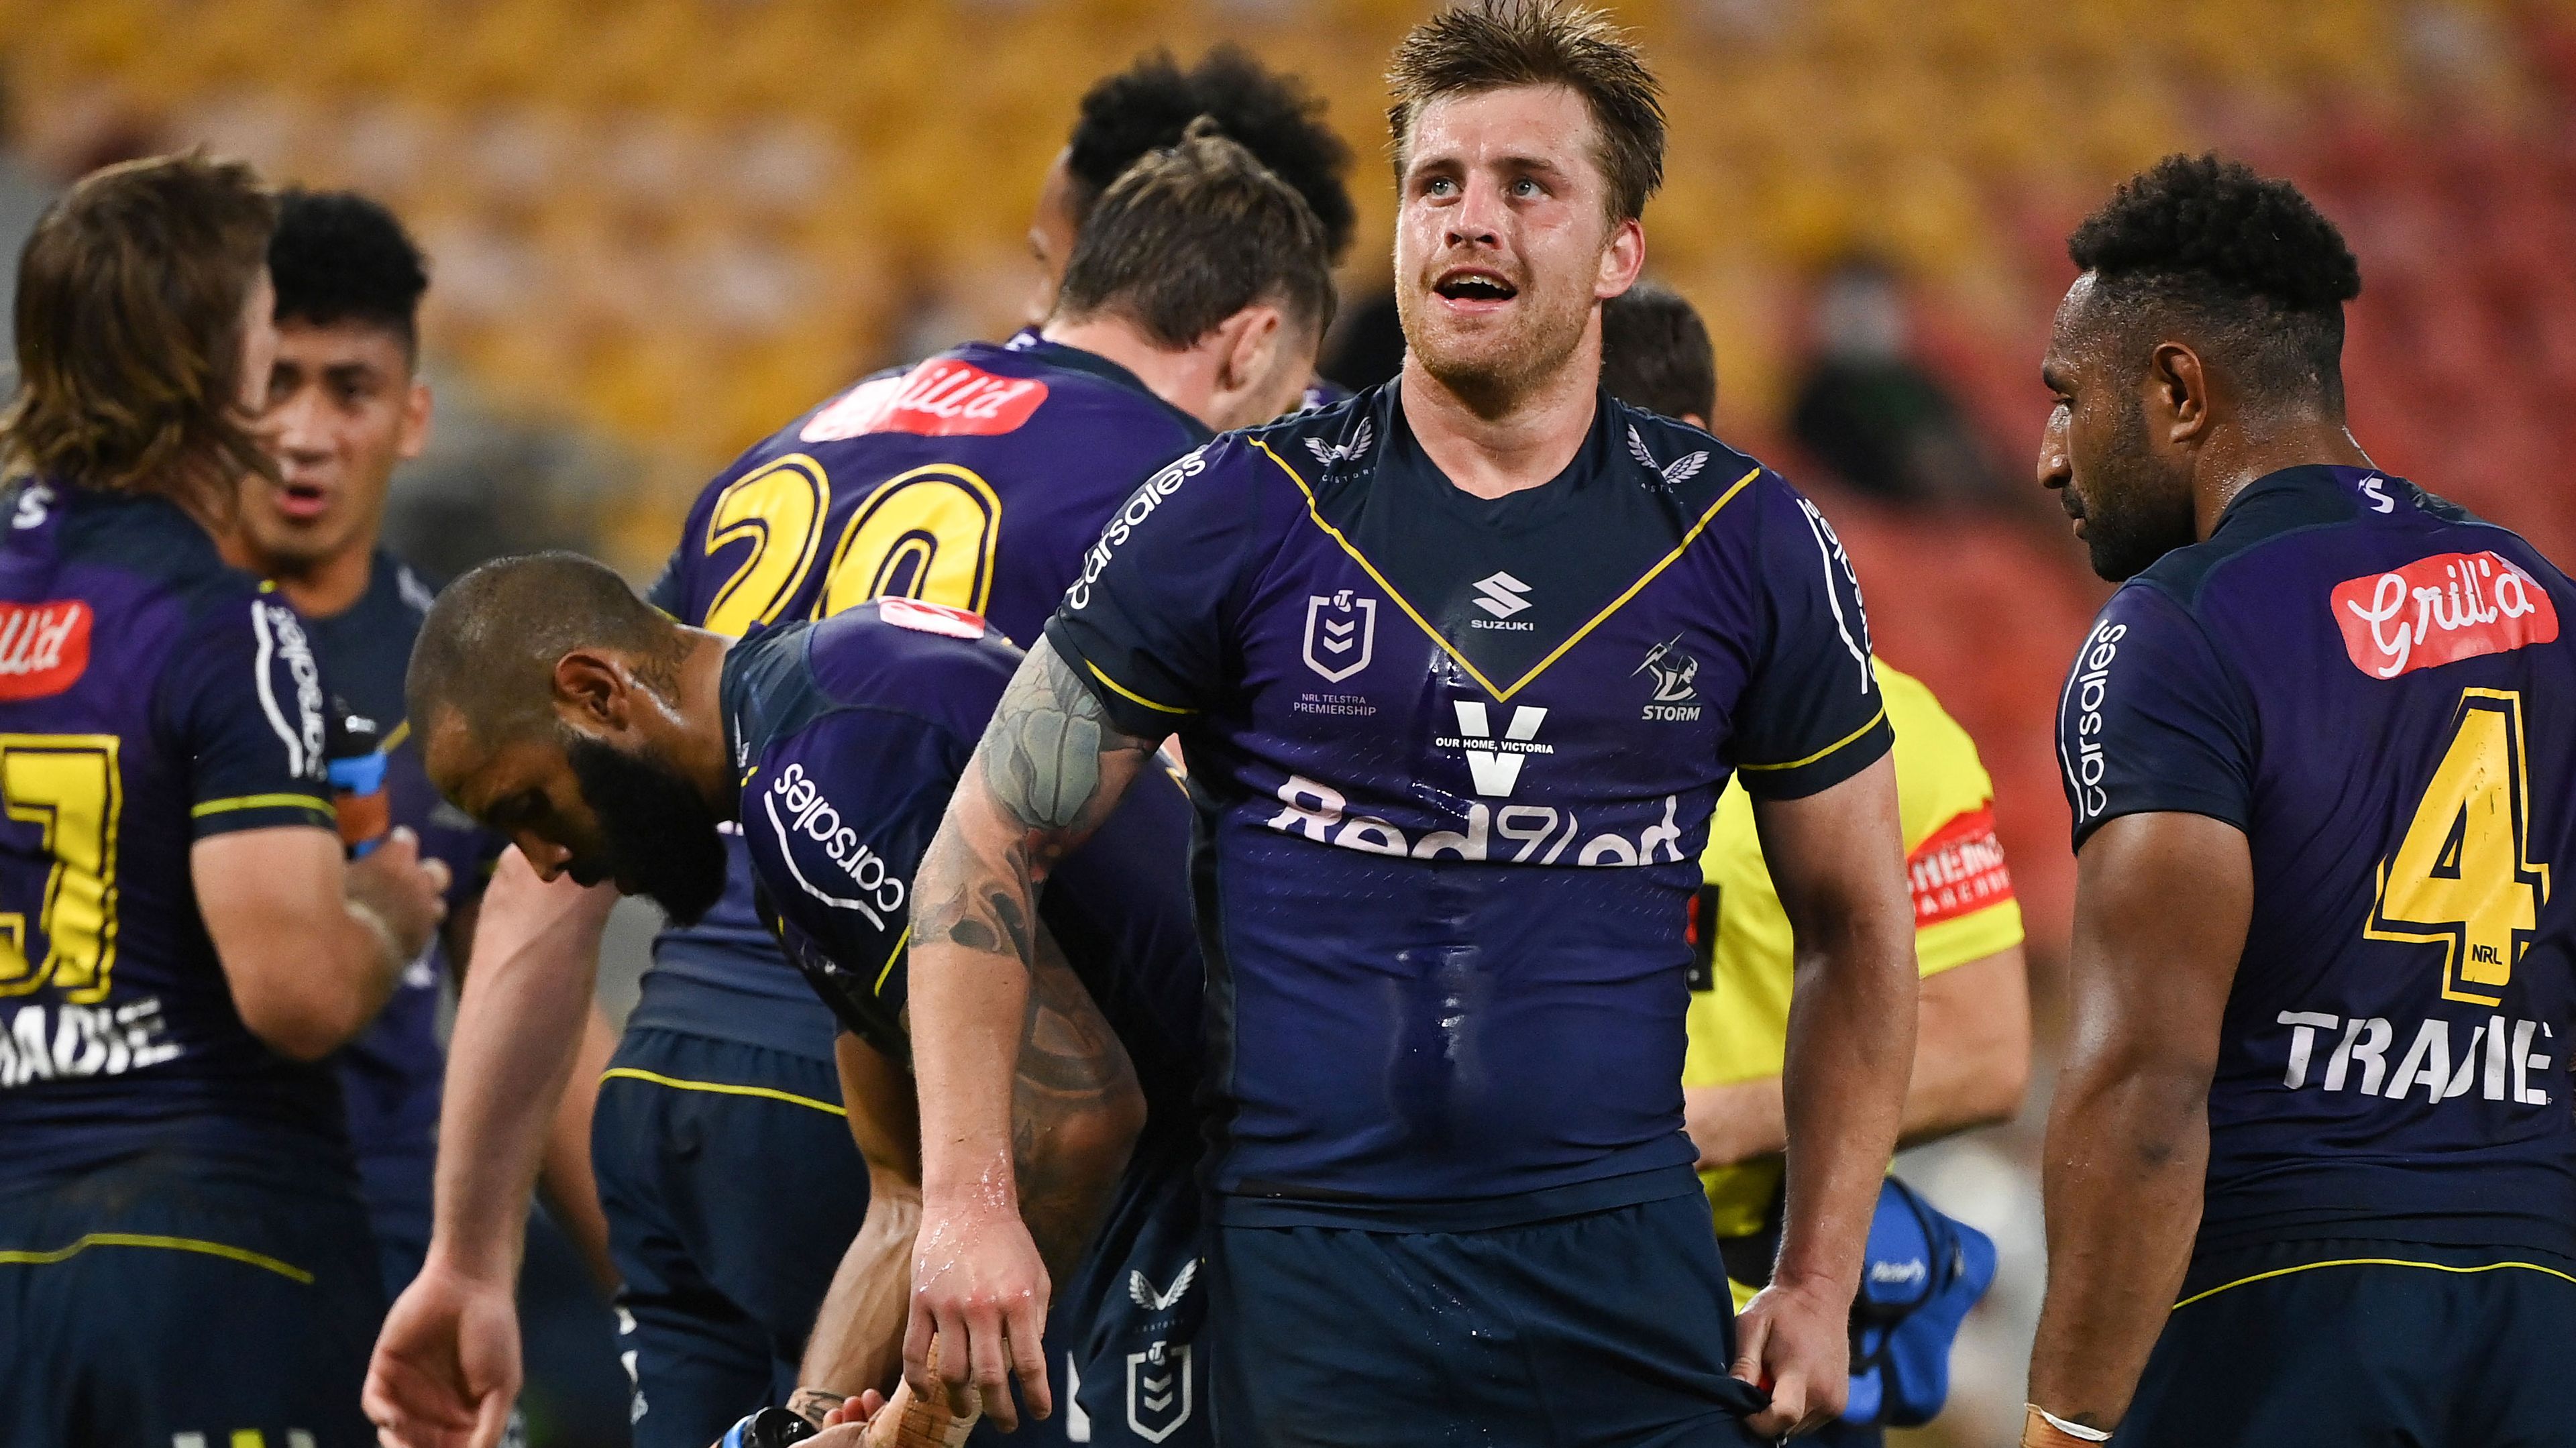 Cameron Munster of the Storm looks on during the round 20 match against the Panthers in 2021.